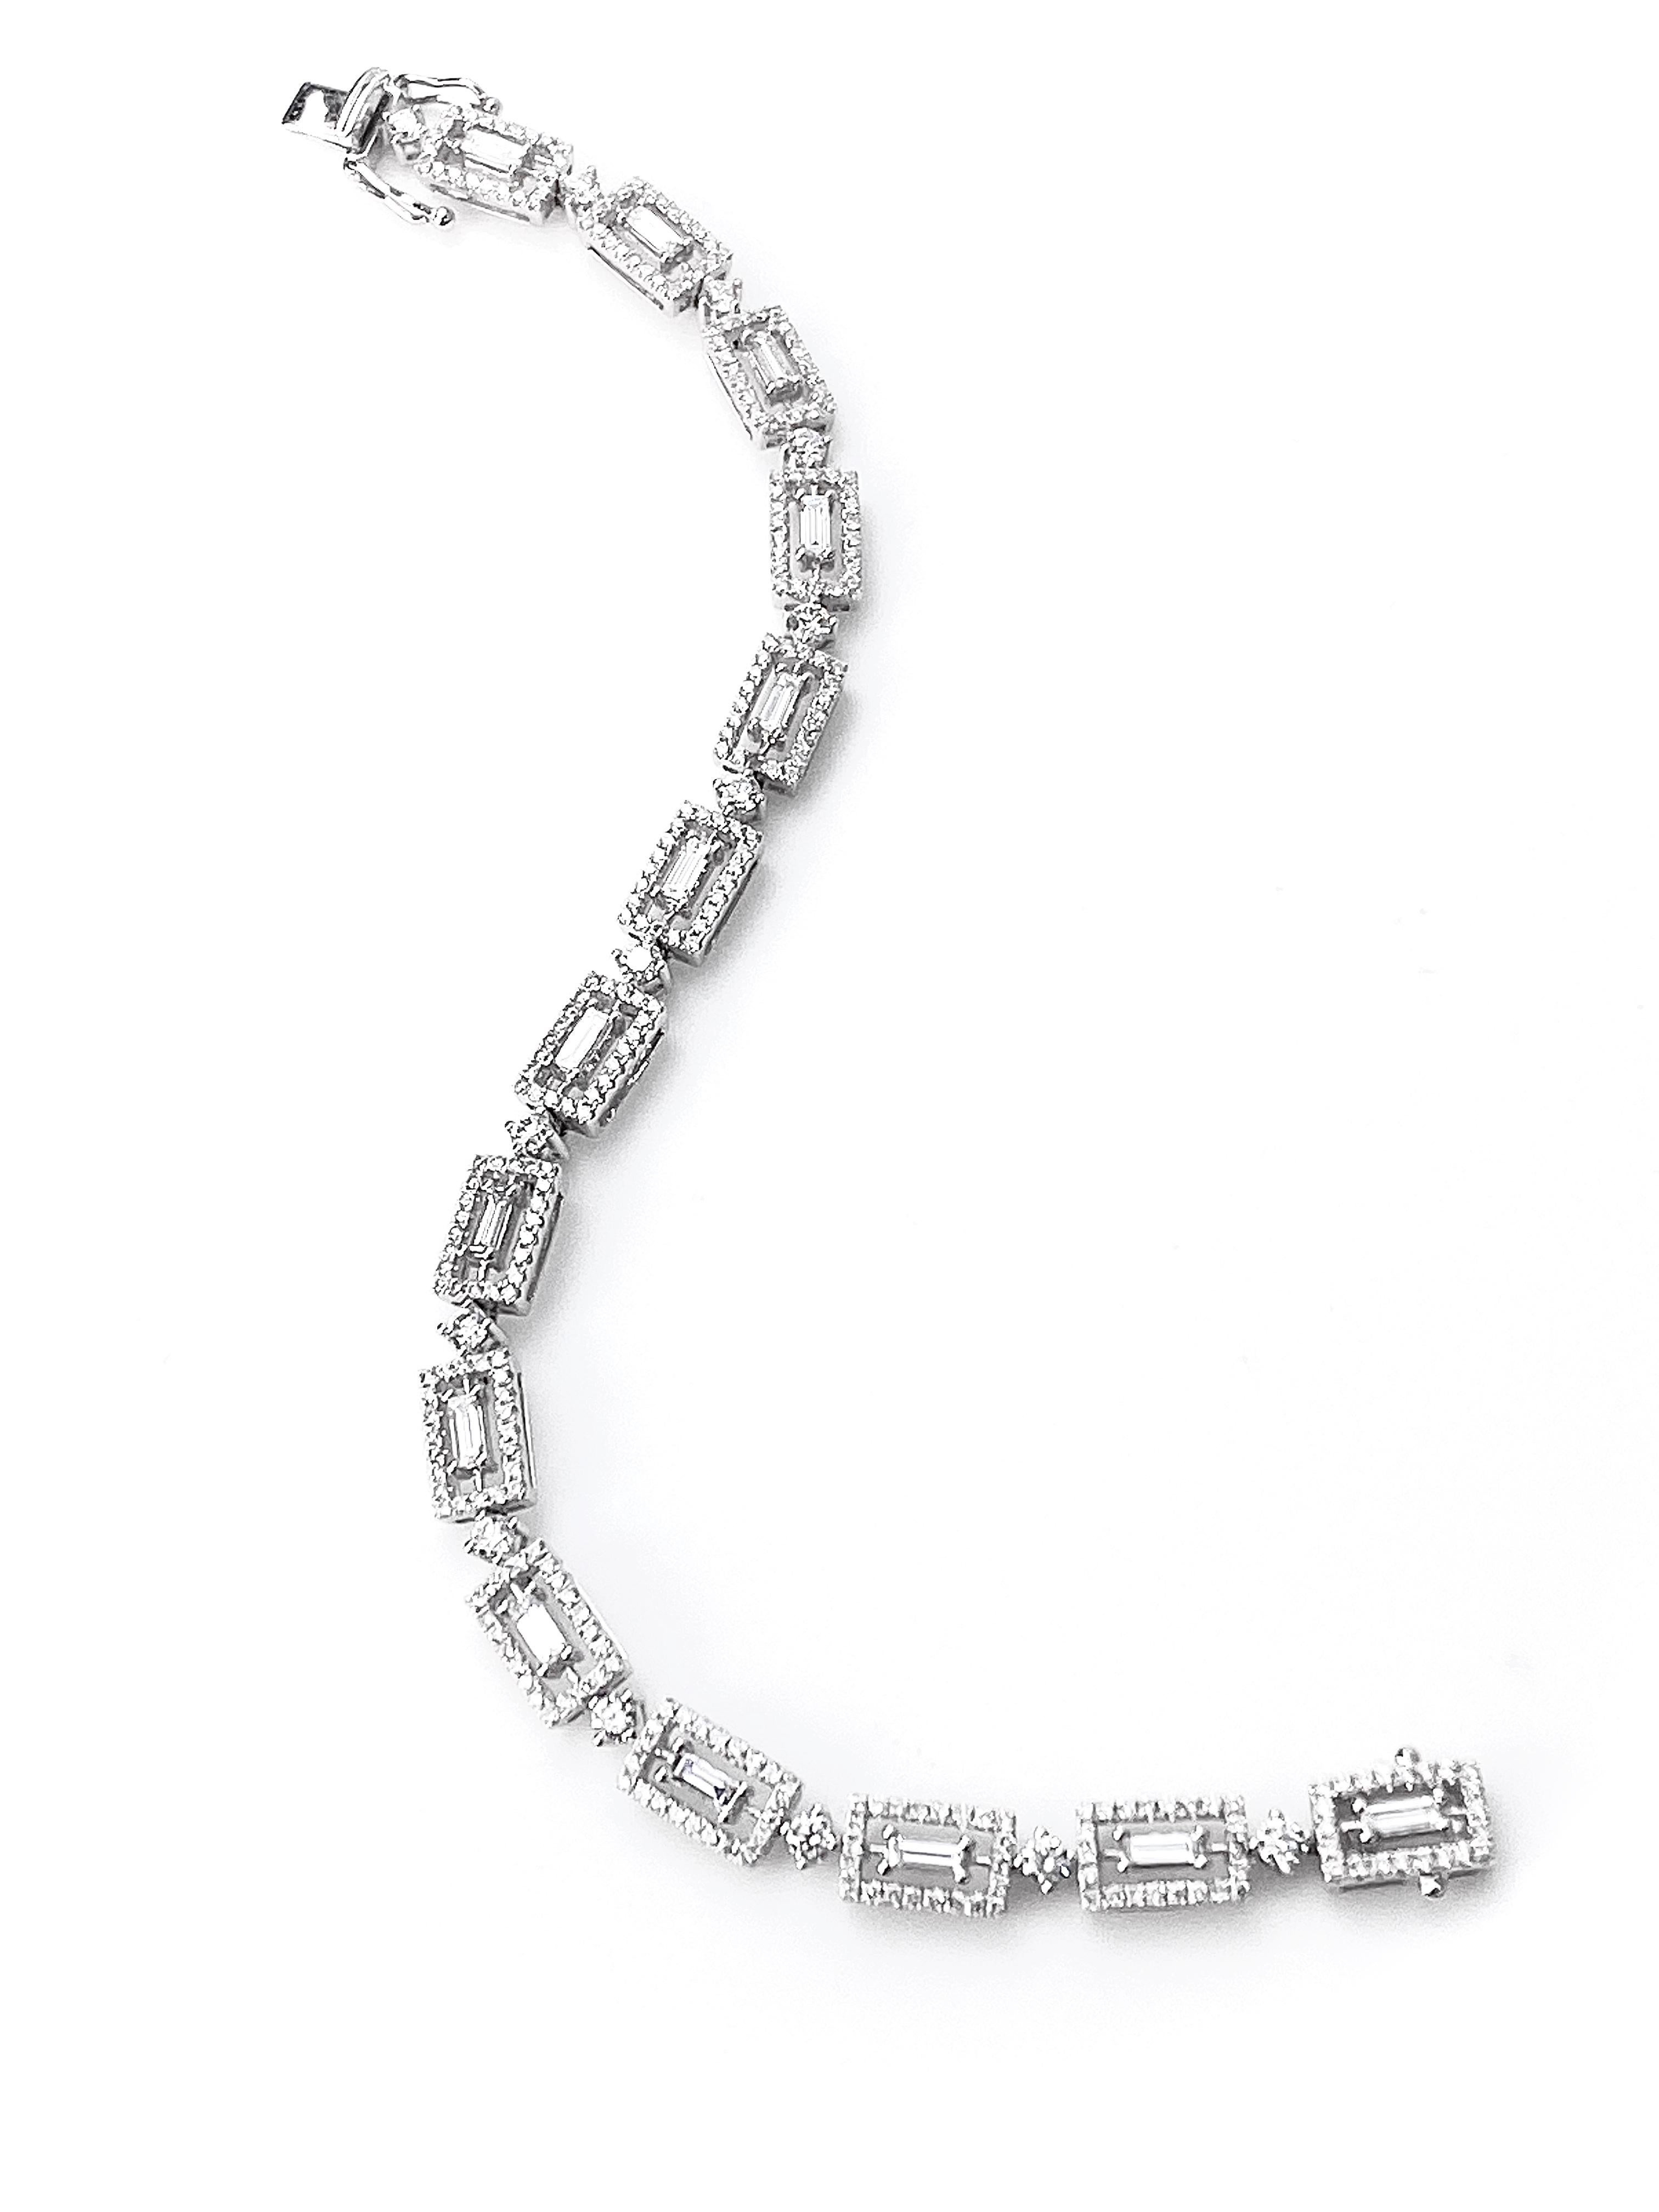 Ladies' bracelet in 18kt white gold set with 3.27ct total weight of diamonds. 14 baguette diamonds totalling 0.99ct surrounded by a frame of round brilliant diamonds equal to 1.38ct total separated by 14 round brilliant diamonds totalling 0.90ct.